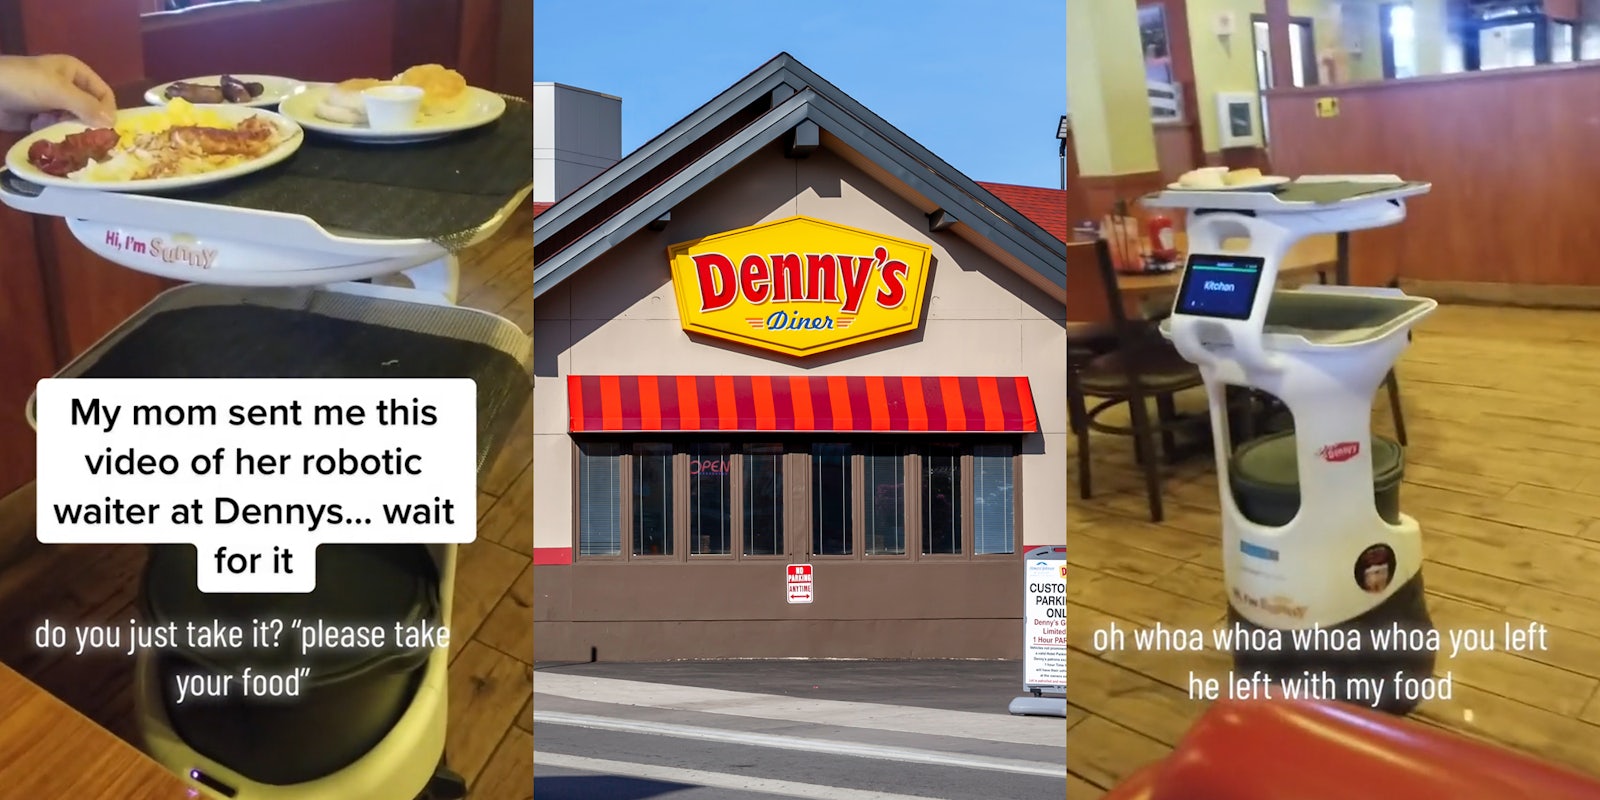 Denny's restaurant with robot server giving customers food with caption 'My mom sent me this video of her robotic waiter at Dennys...wait fot it' 'do you just take it?'please take your food'' (l) Denny's building with sign (c) Denny's robot server driving away with food with caption 'oh whoa whoa whoa you left he left with my food' (r)